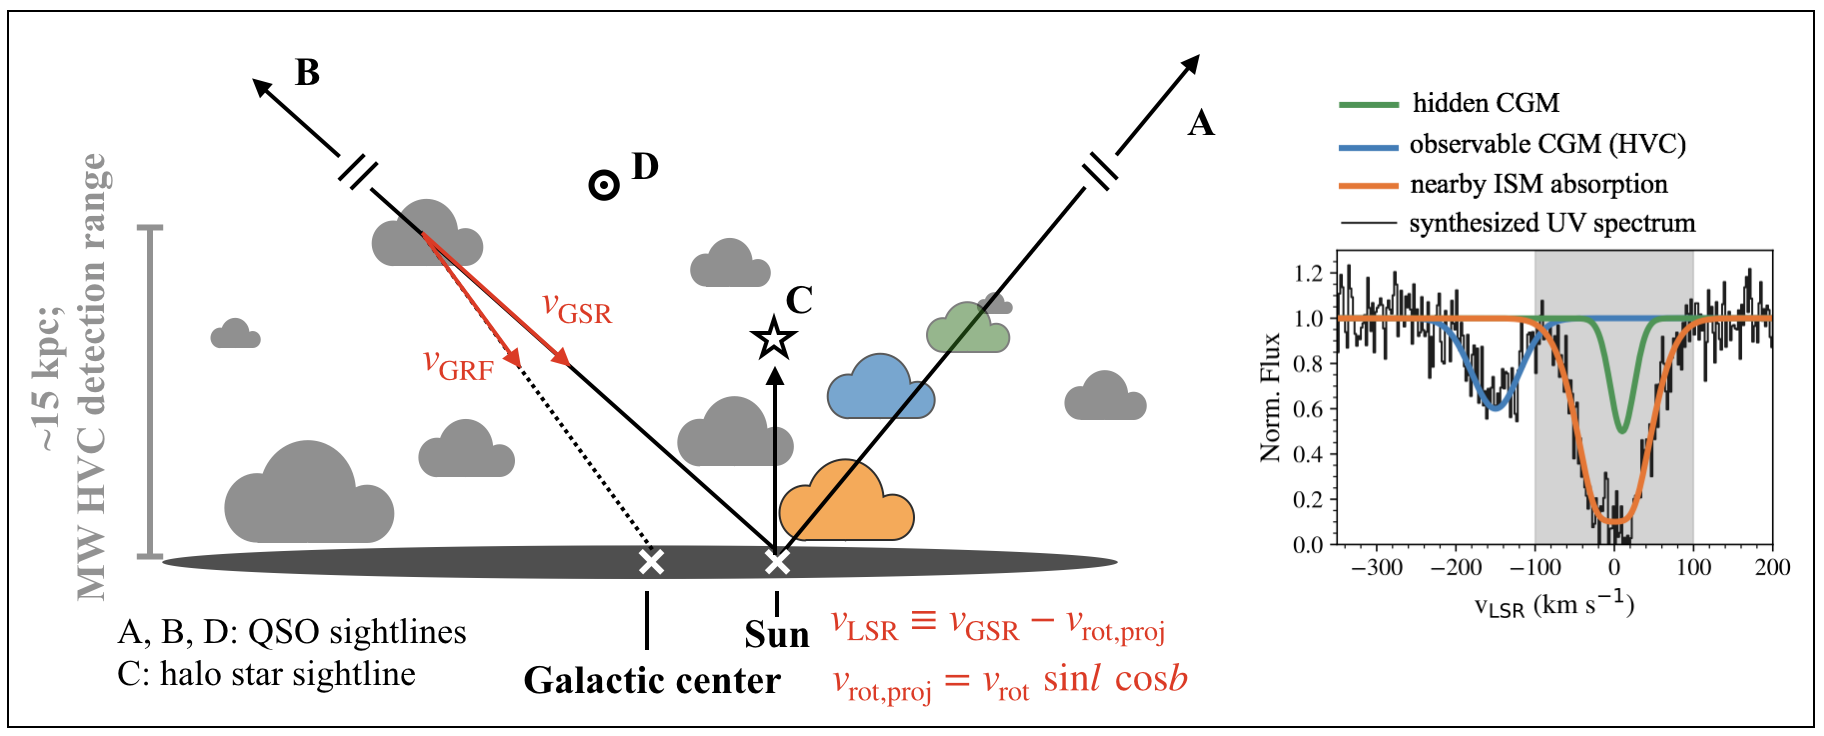 Schematic Illustration of Biases in Observing the Milky Way